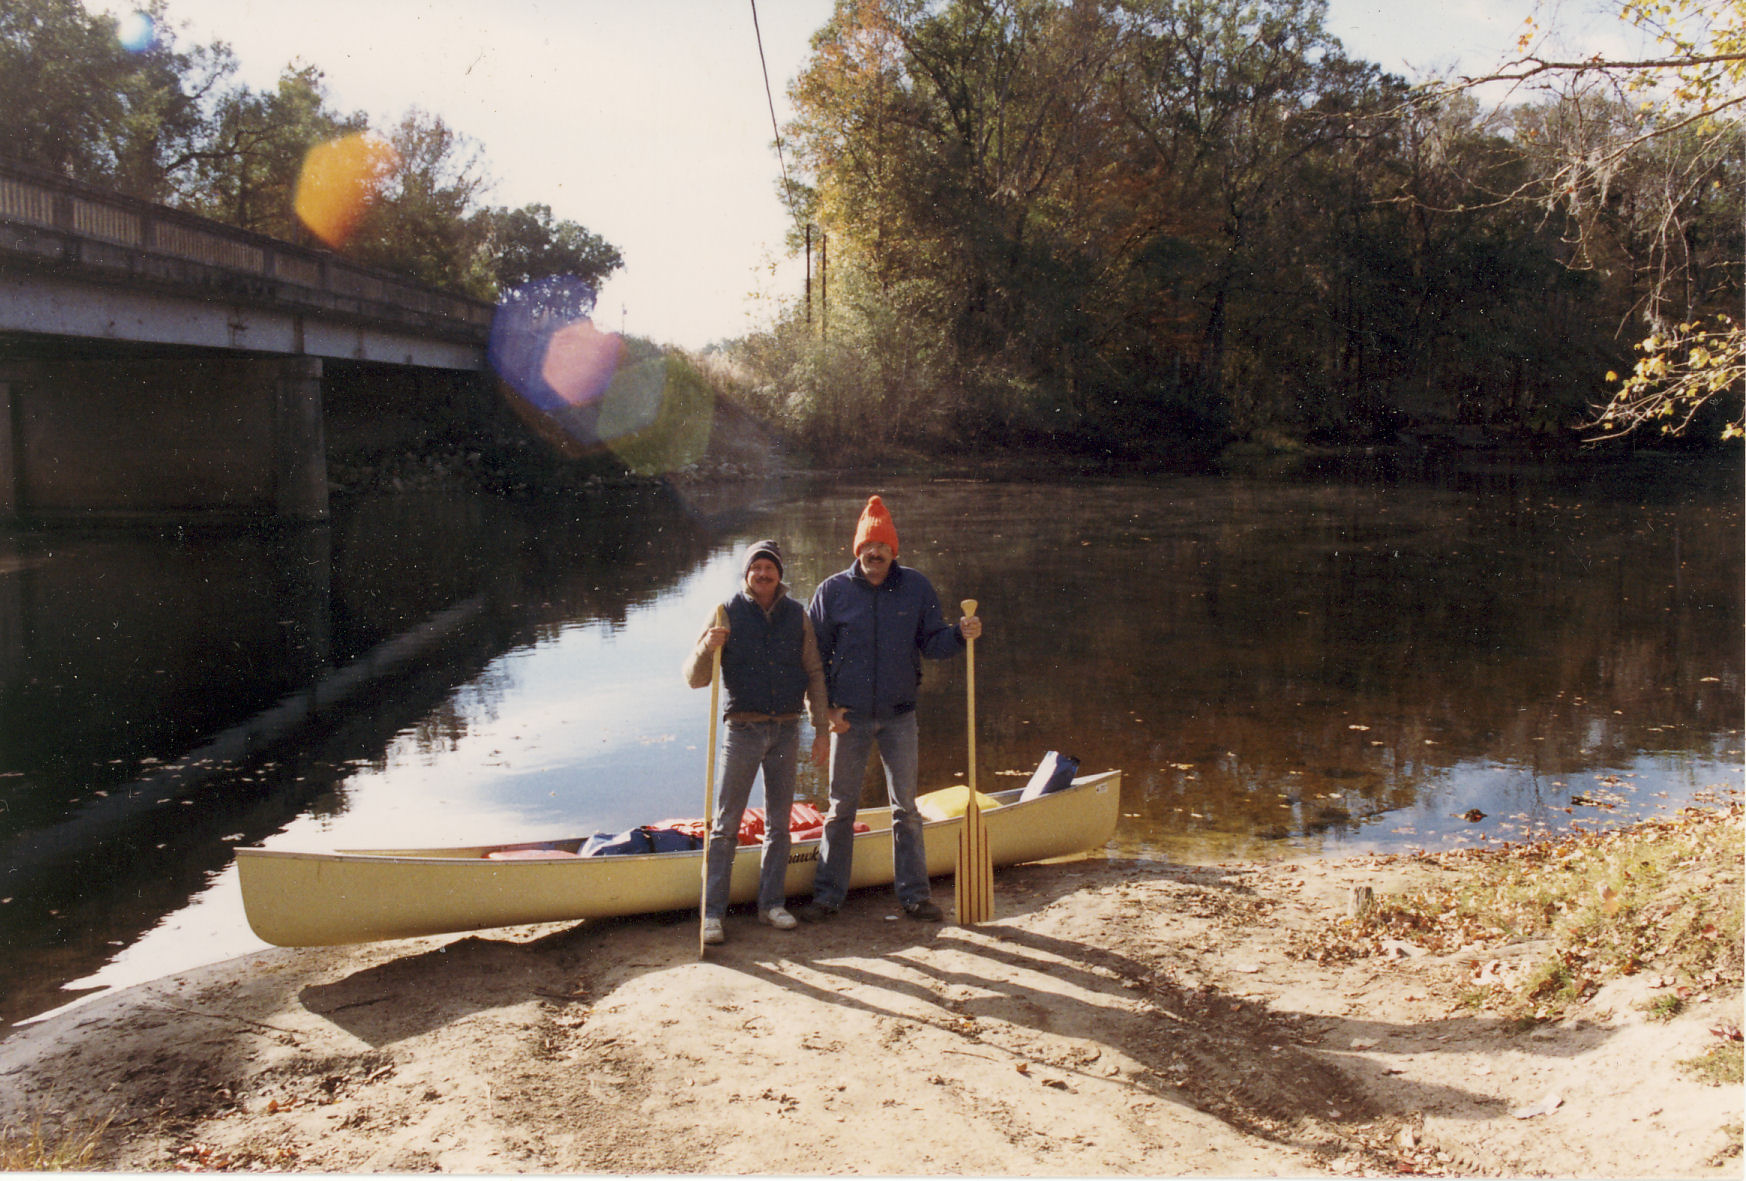 David and Larry with canoe